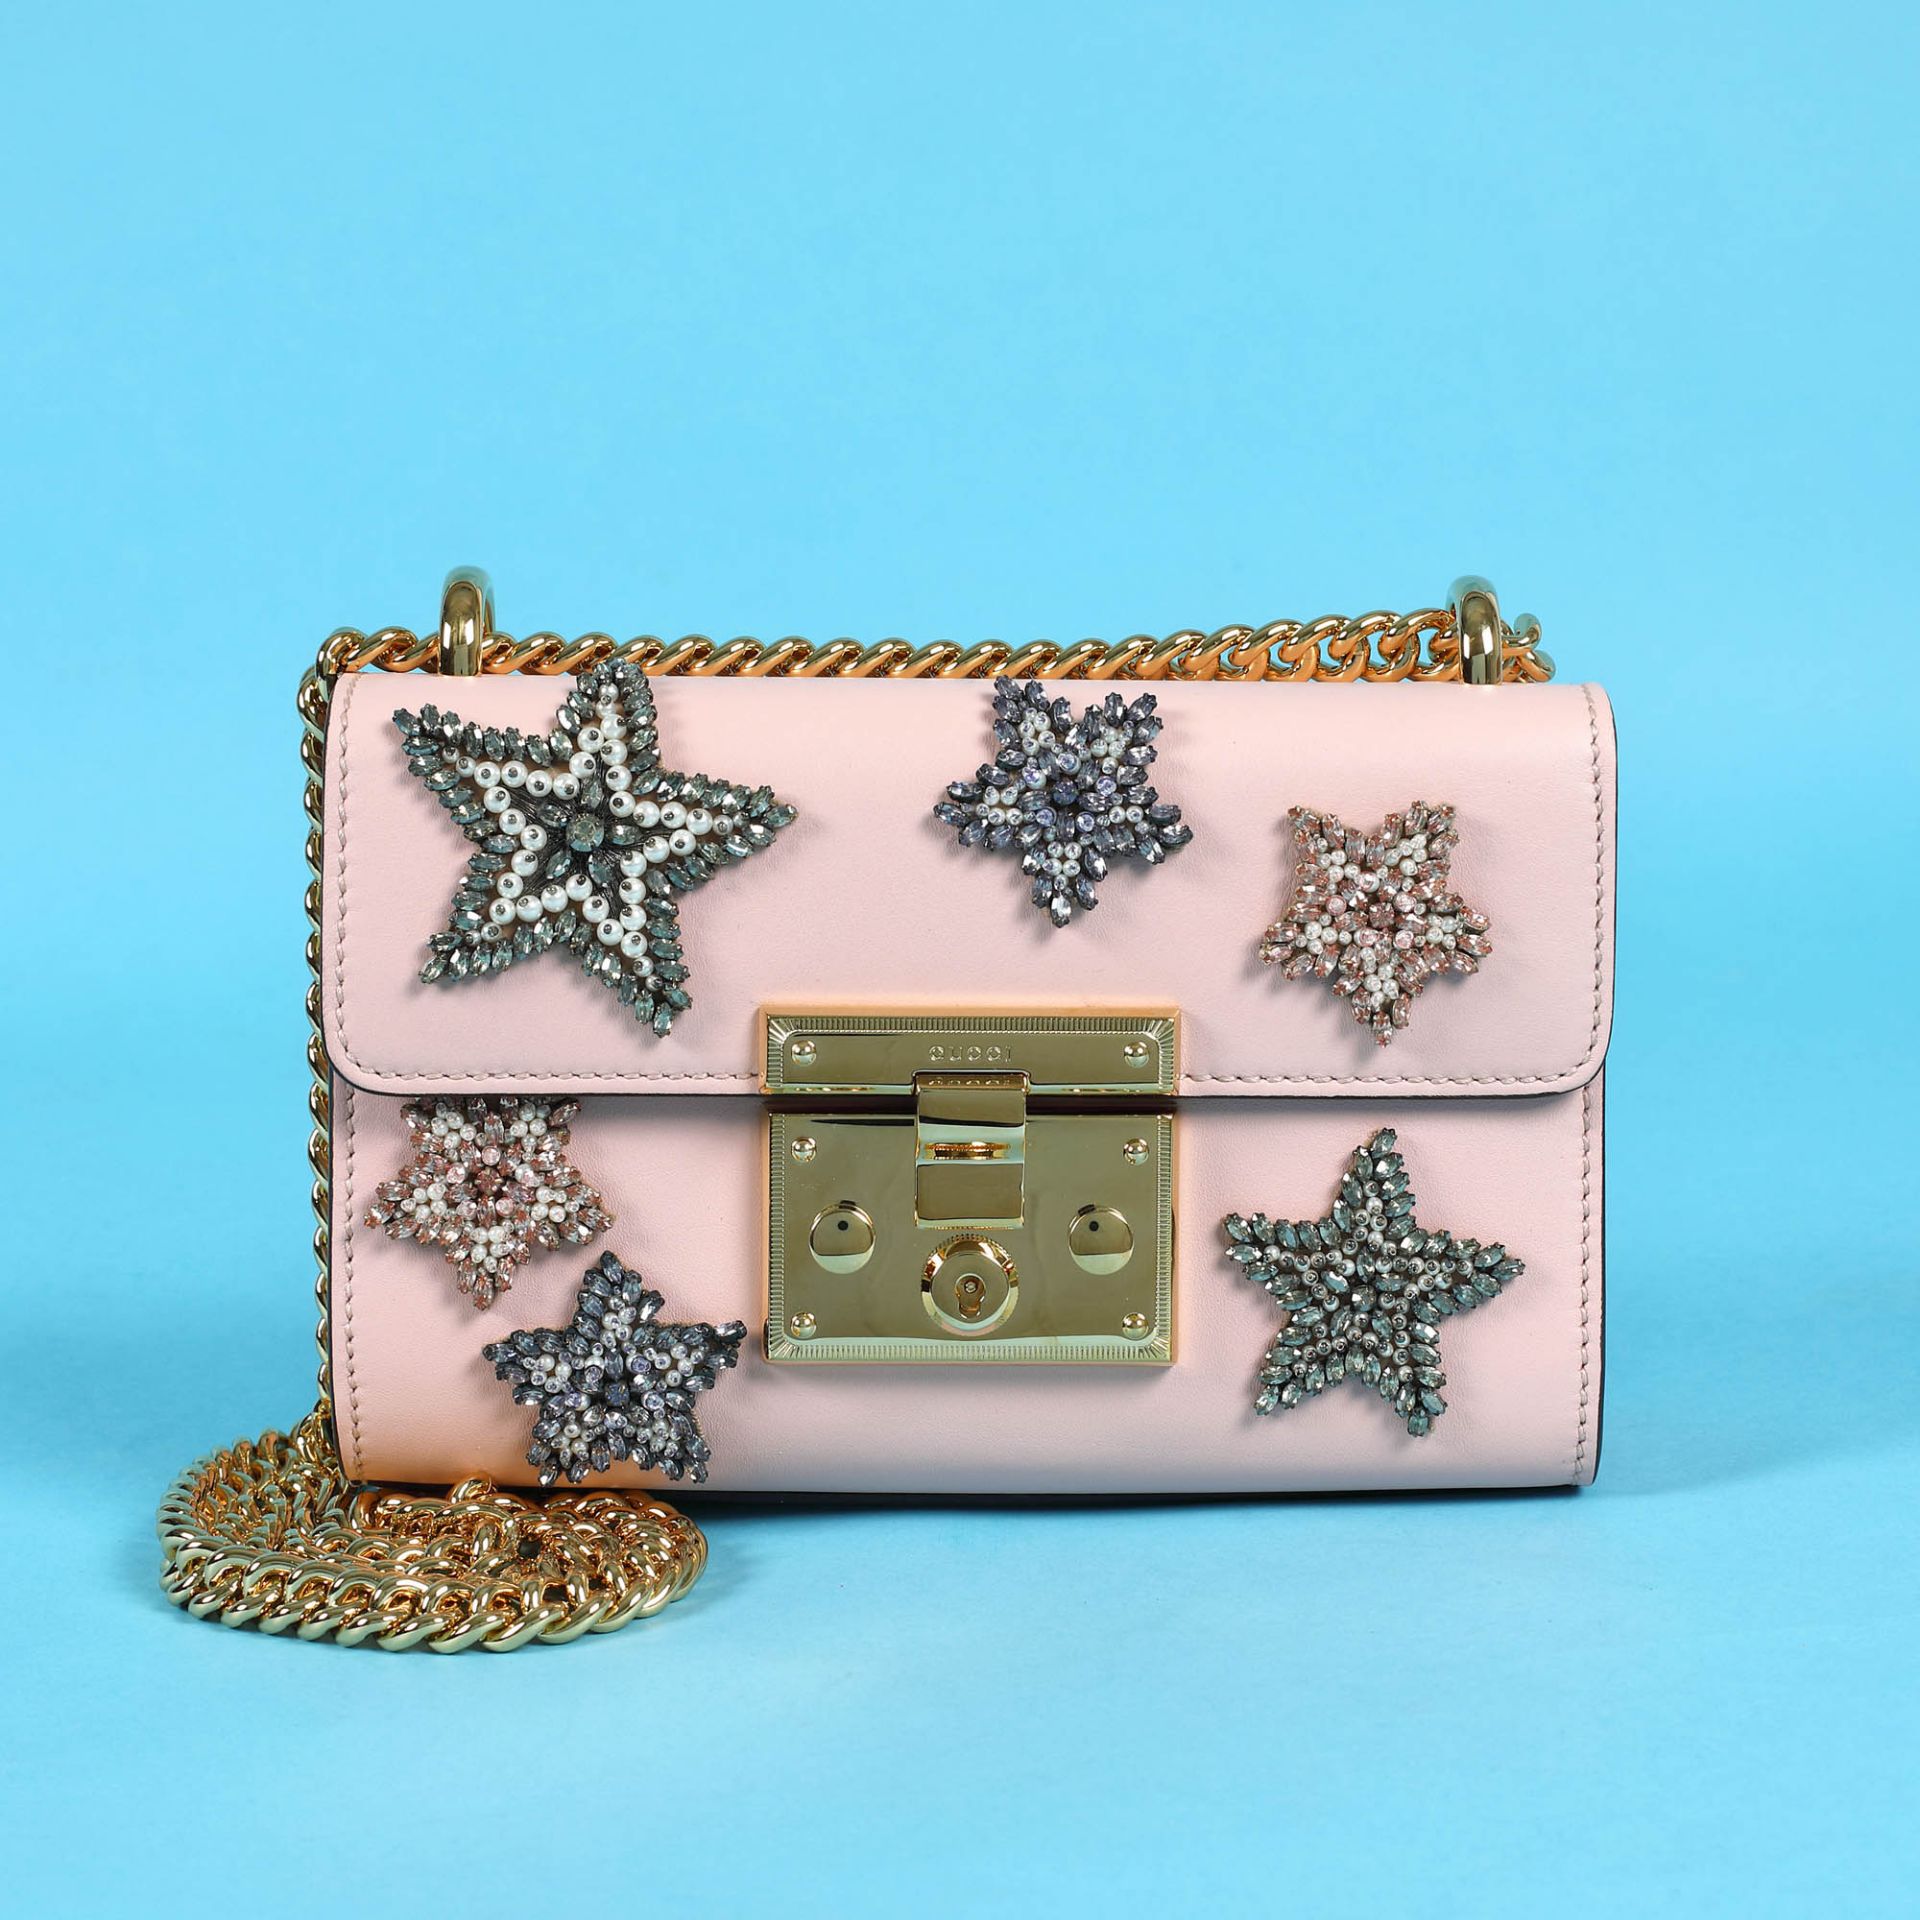 "Padlock" - Gucci bag, leather, pale pink, with applications embroidered in star shapes, for women - Image 5 of 12